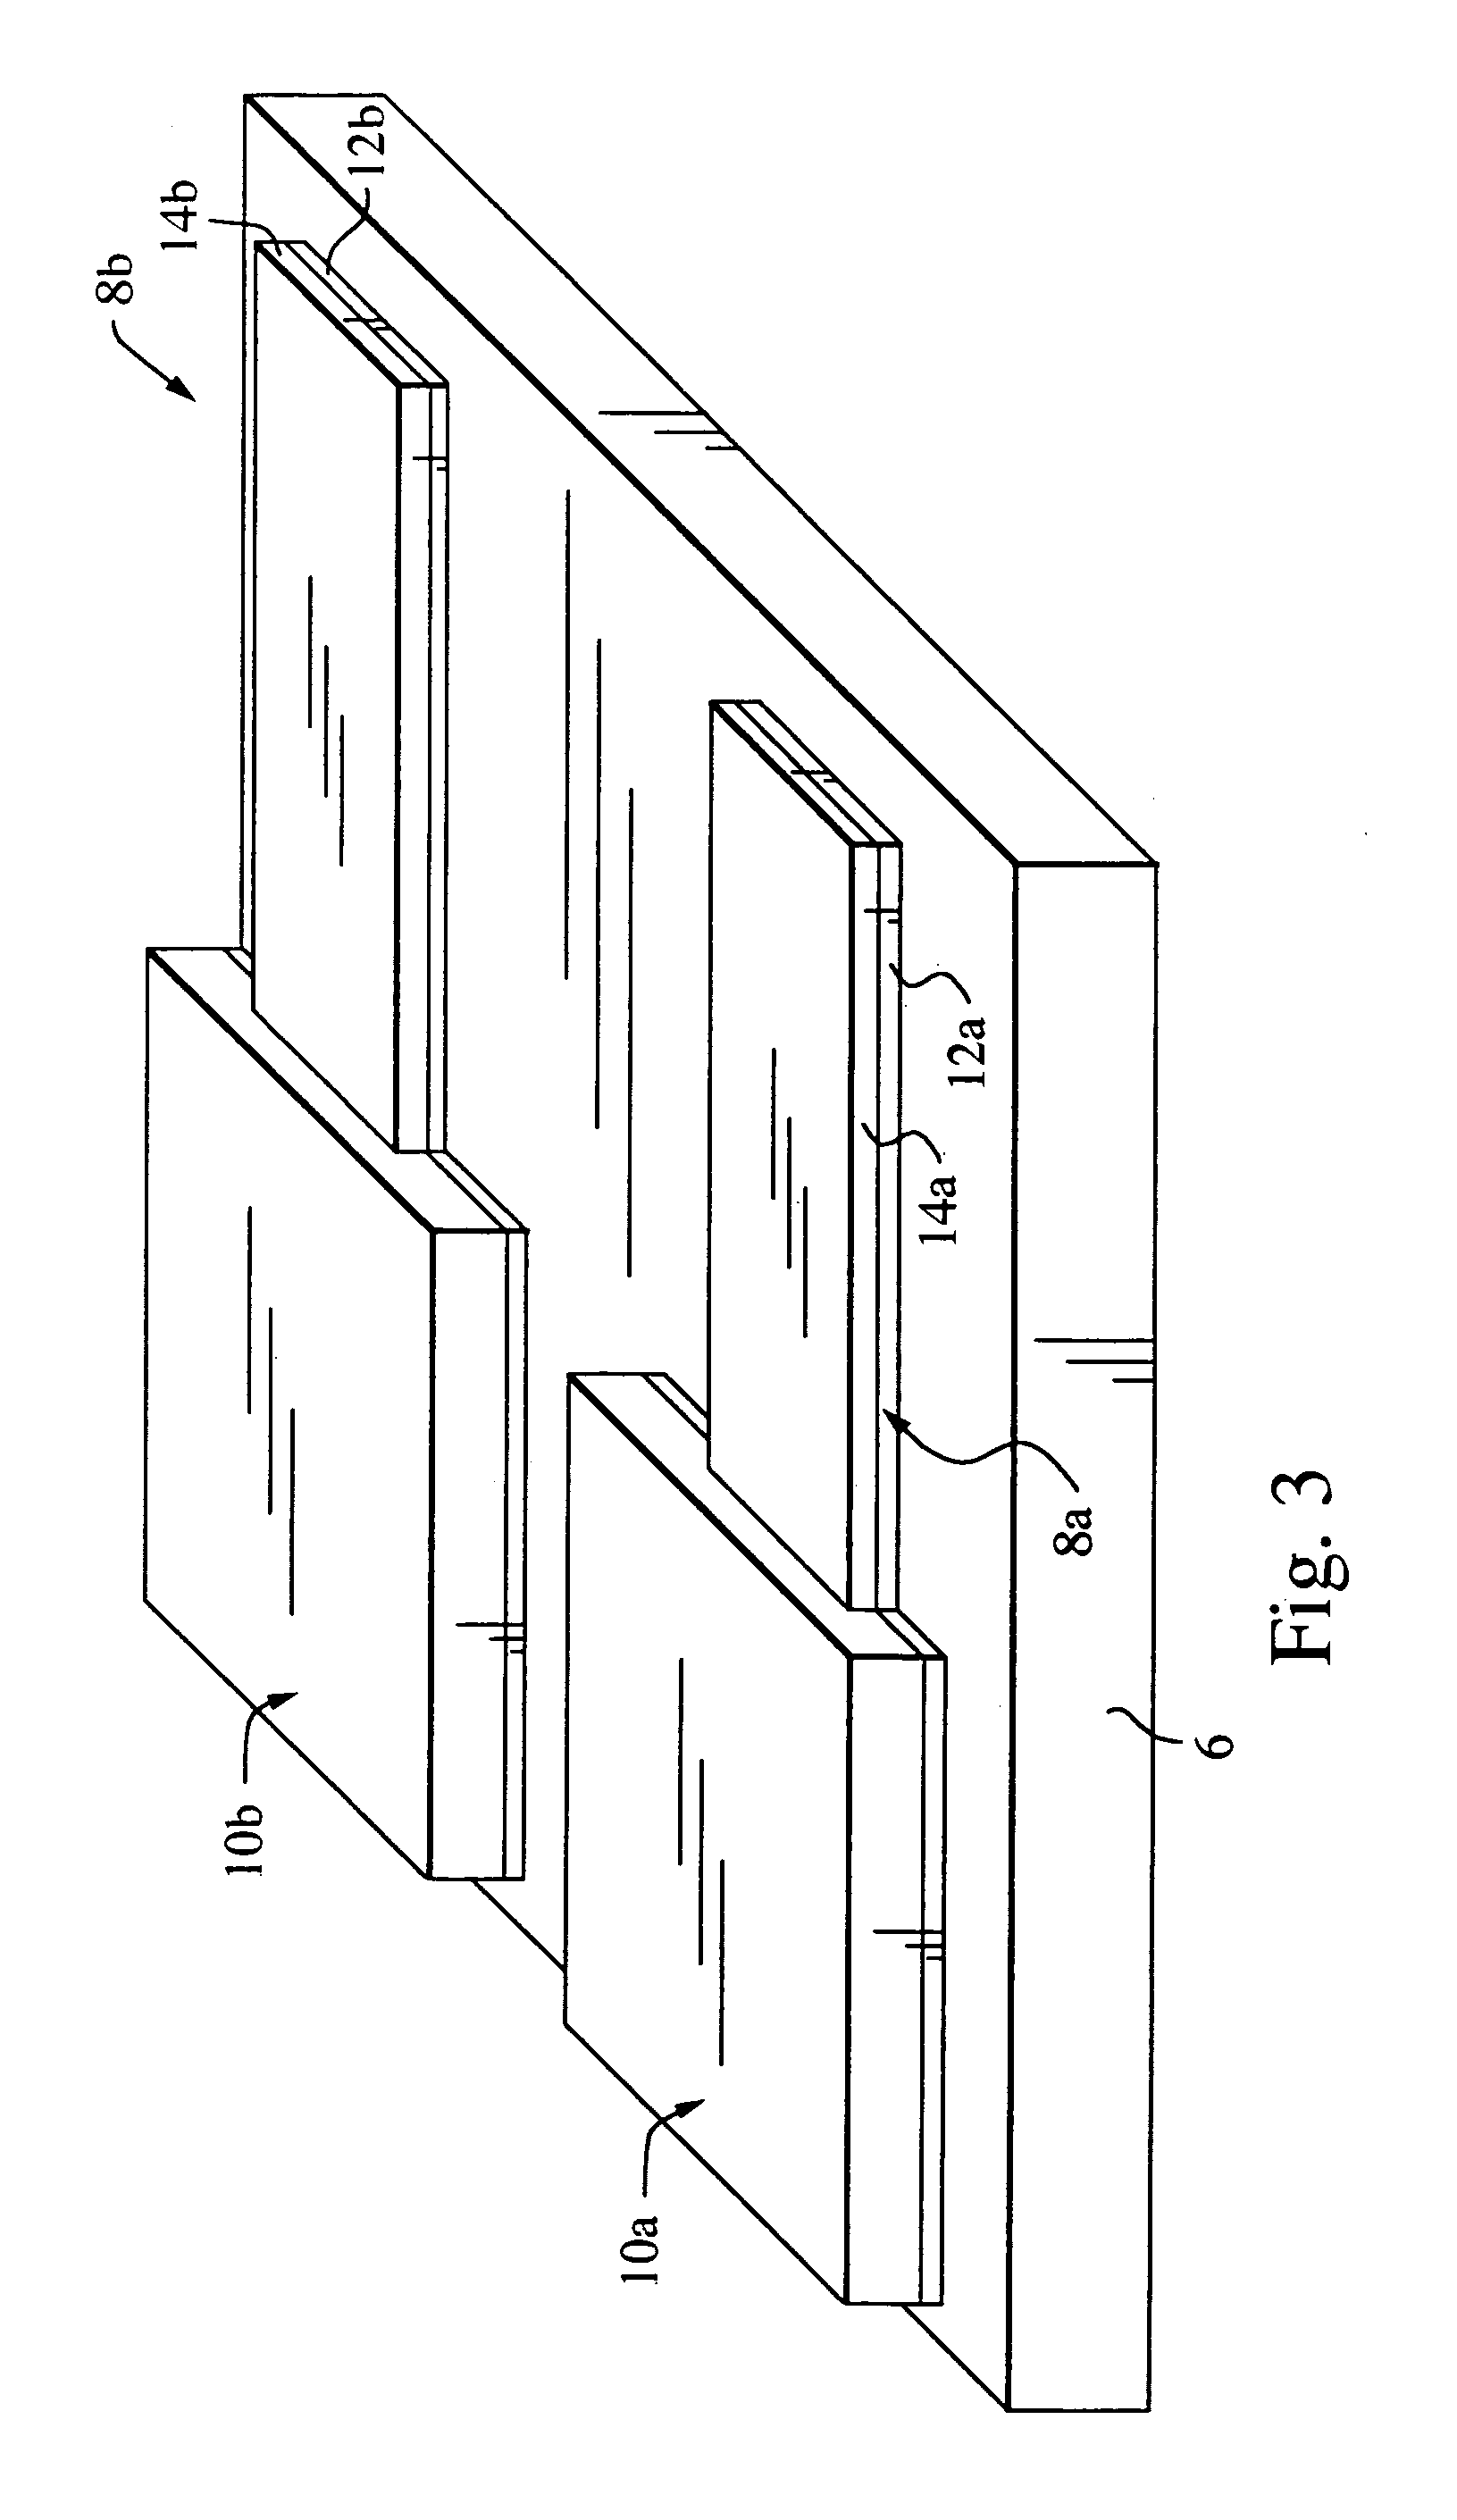 High temperature circuit structures with thin film layer